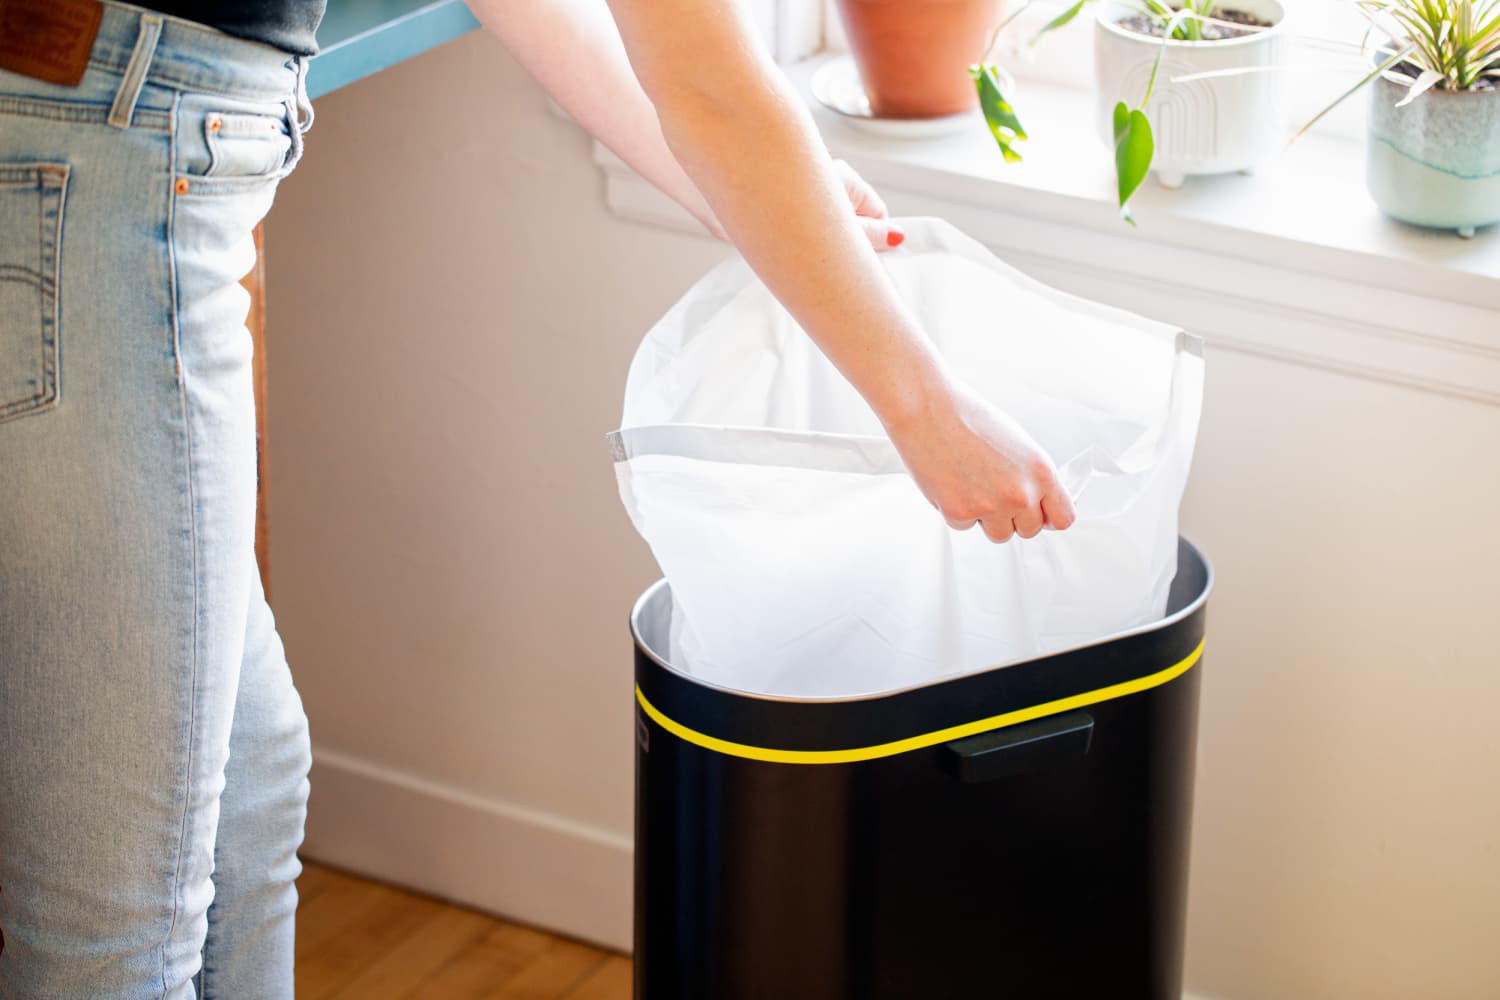 How To Put A Trash Bag In The Trash Can